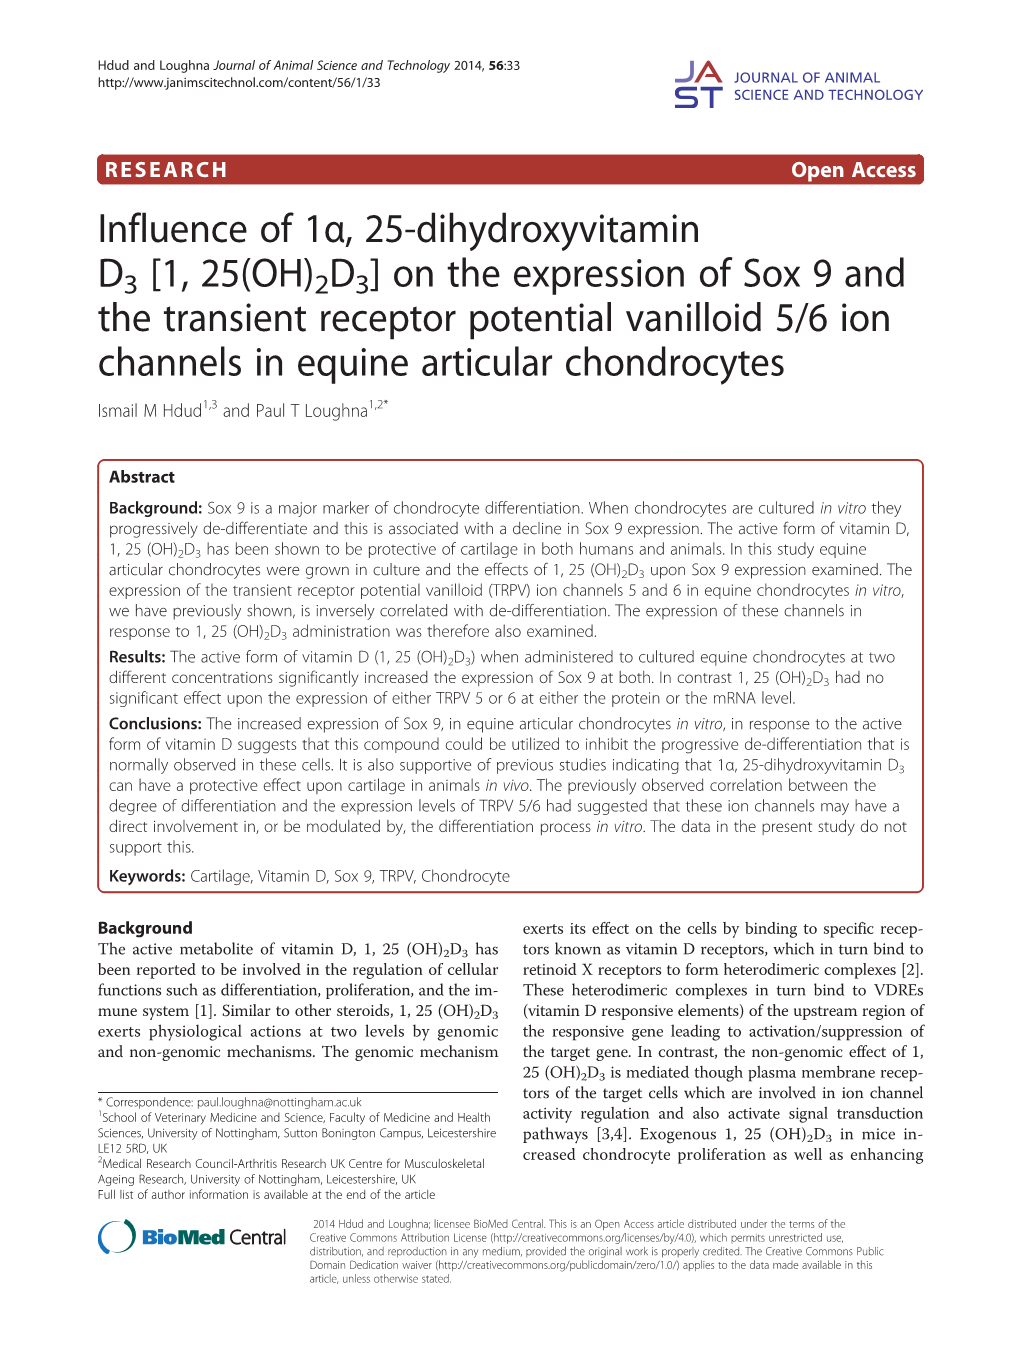 Influence of 1Α, 25-Dihydroxyvitamin D3 [1, 25(OH)2D3] on The